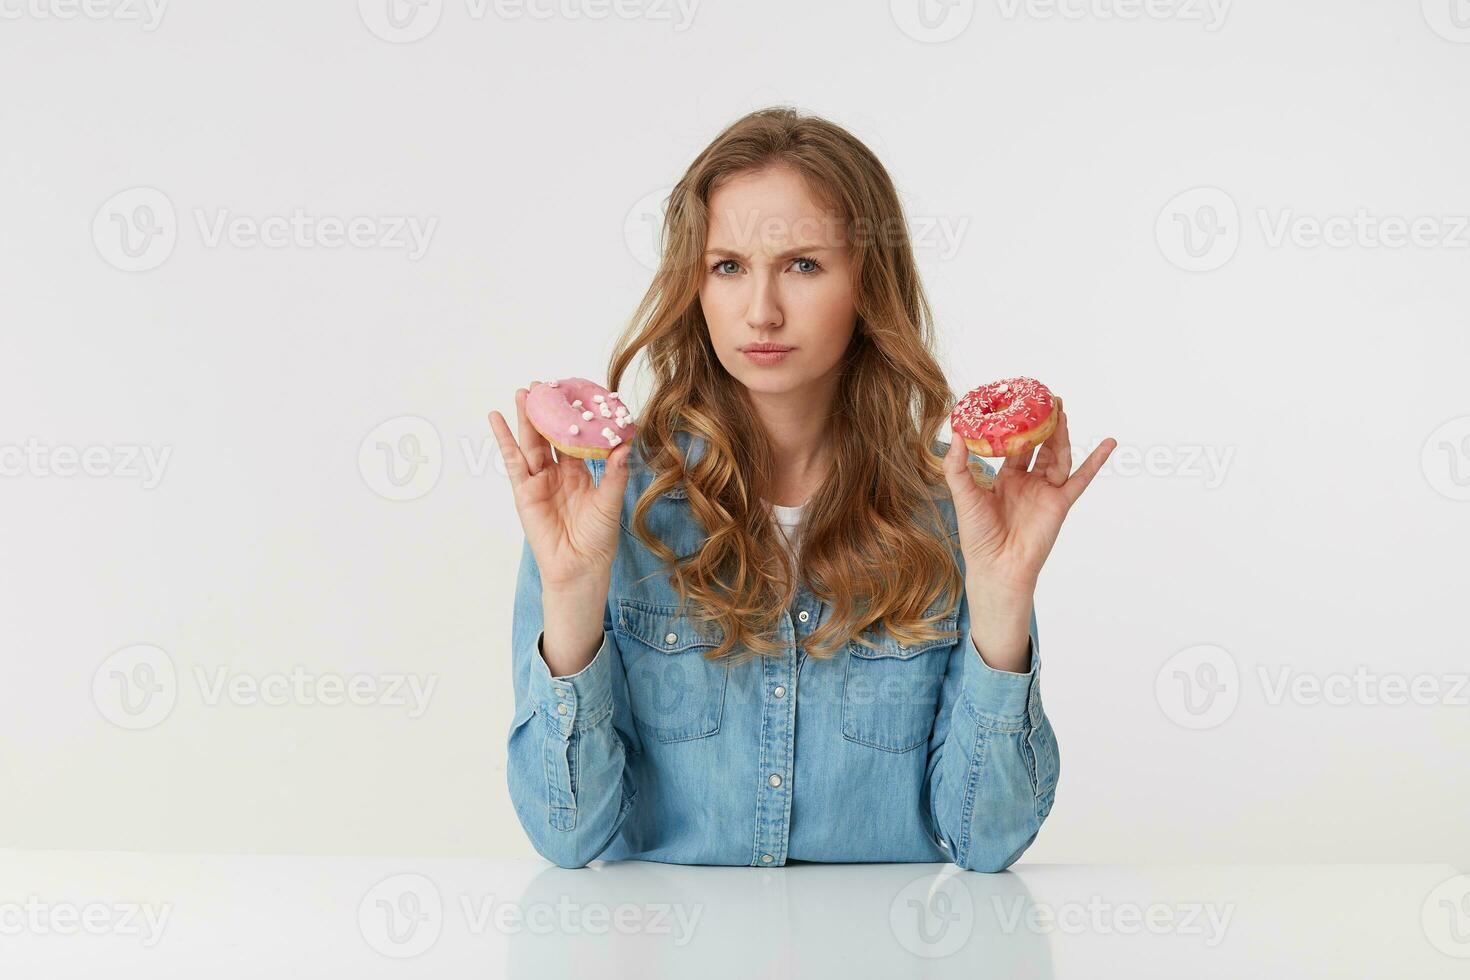 Young beautiful girl holds donuts in her hands, wearing a denim shirt, promotes healthy eating and give up sugar. Looks disapproving of the camera isolated over white background. photo